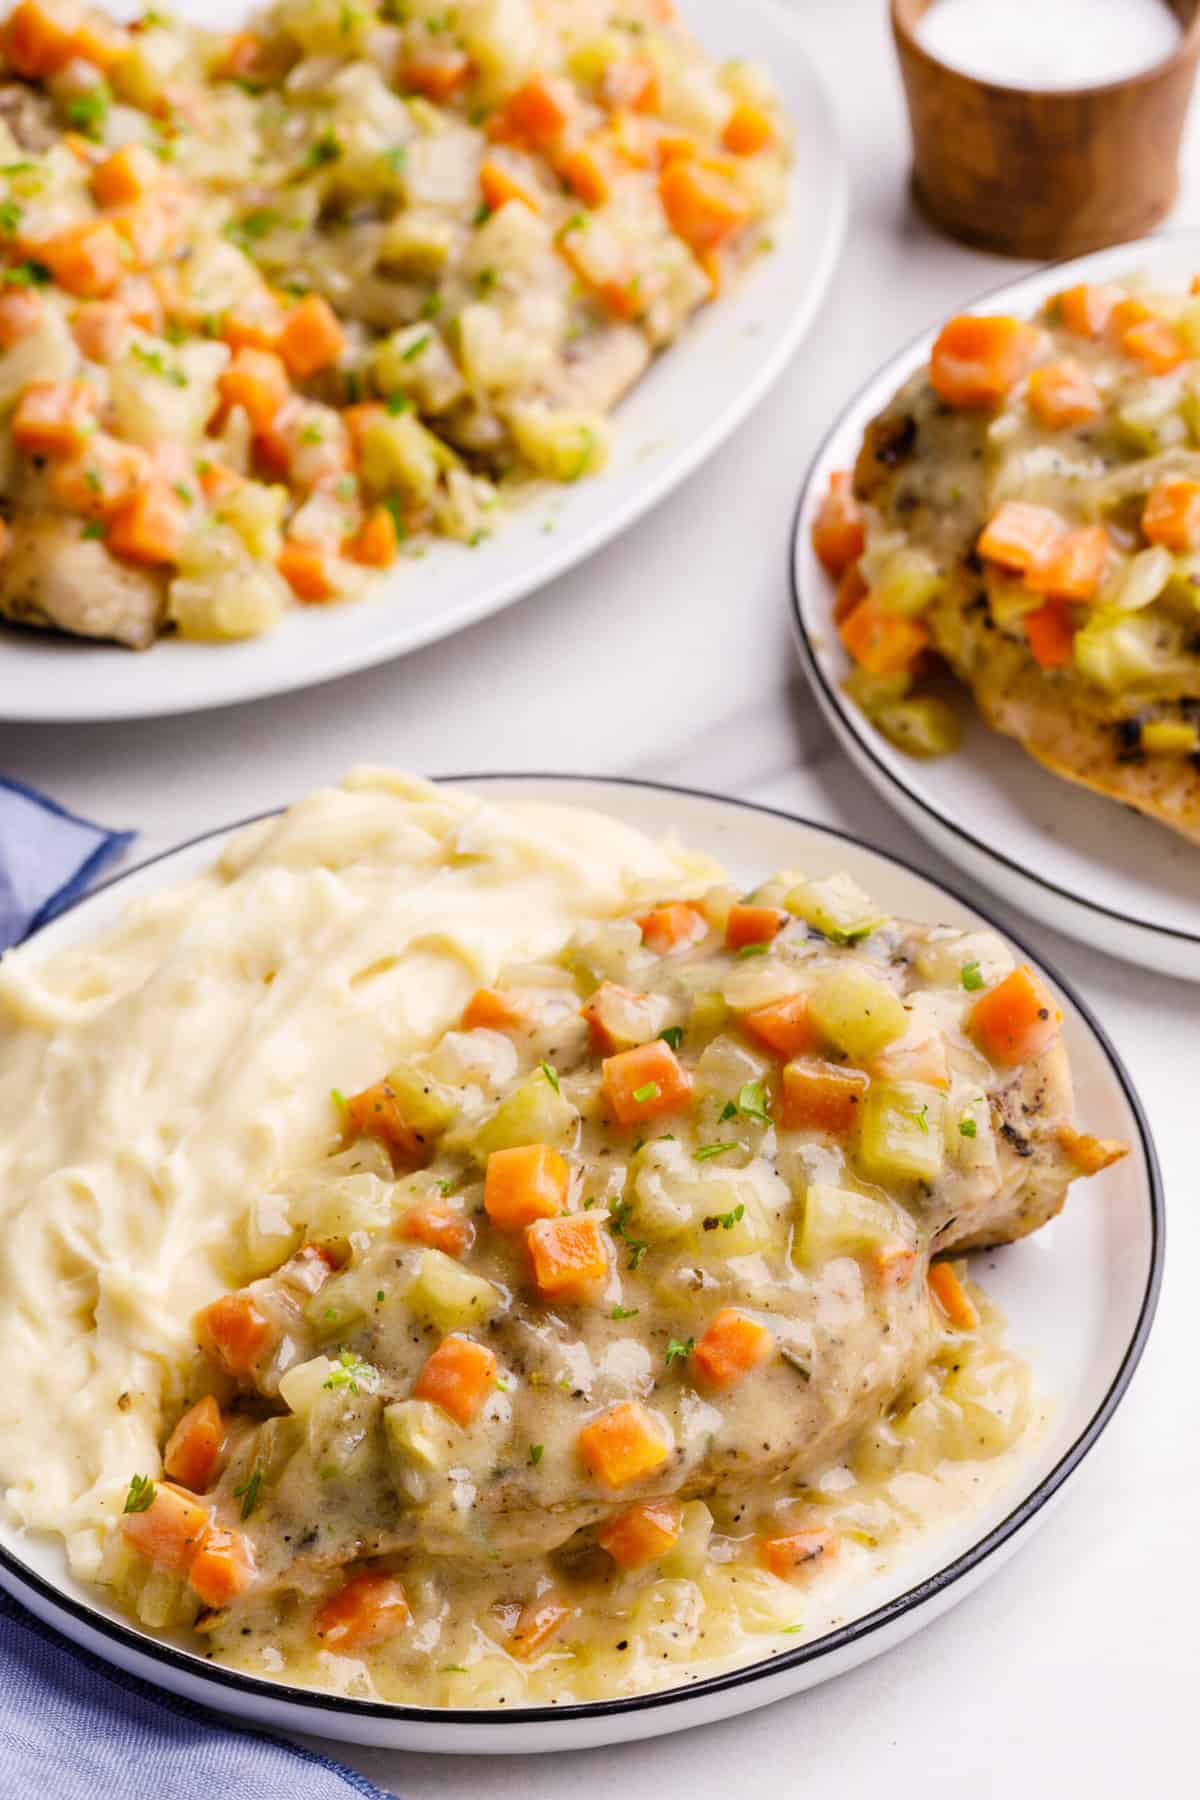 close up image of a plate of dutch oven chicken breast with a side of mashed potatoes